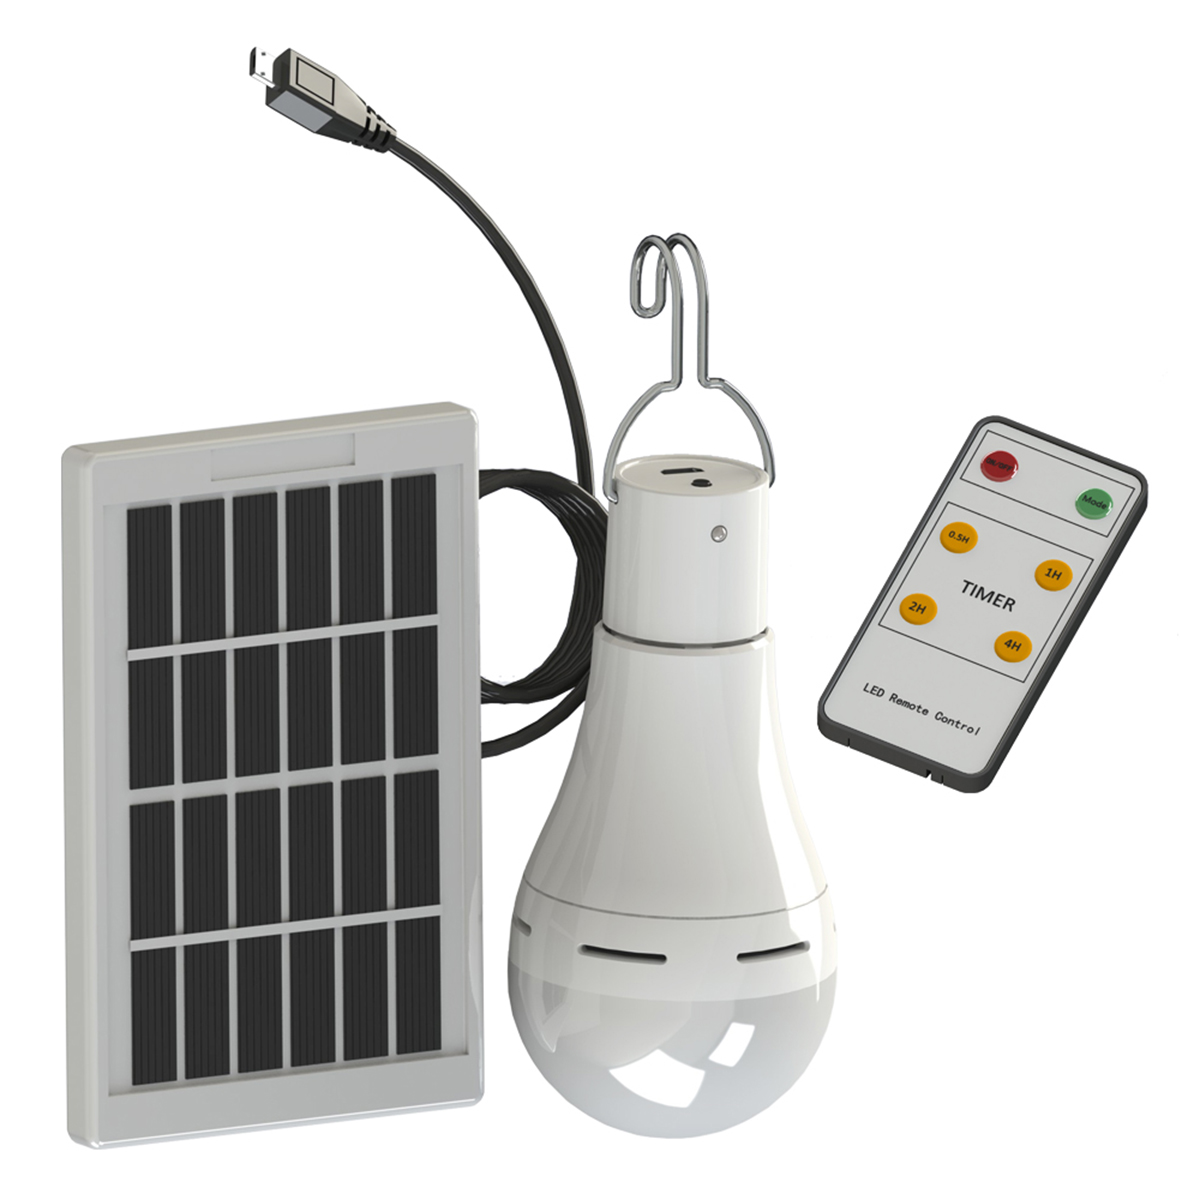 

20W Solar Power USB Rechargeable Camping Light Bulb 5-Modes w Solar Panel 3m Cable & Remote